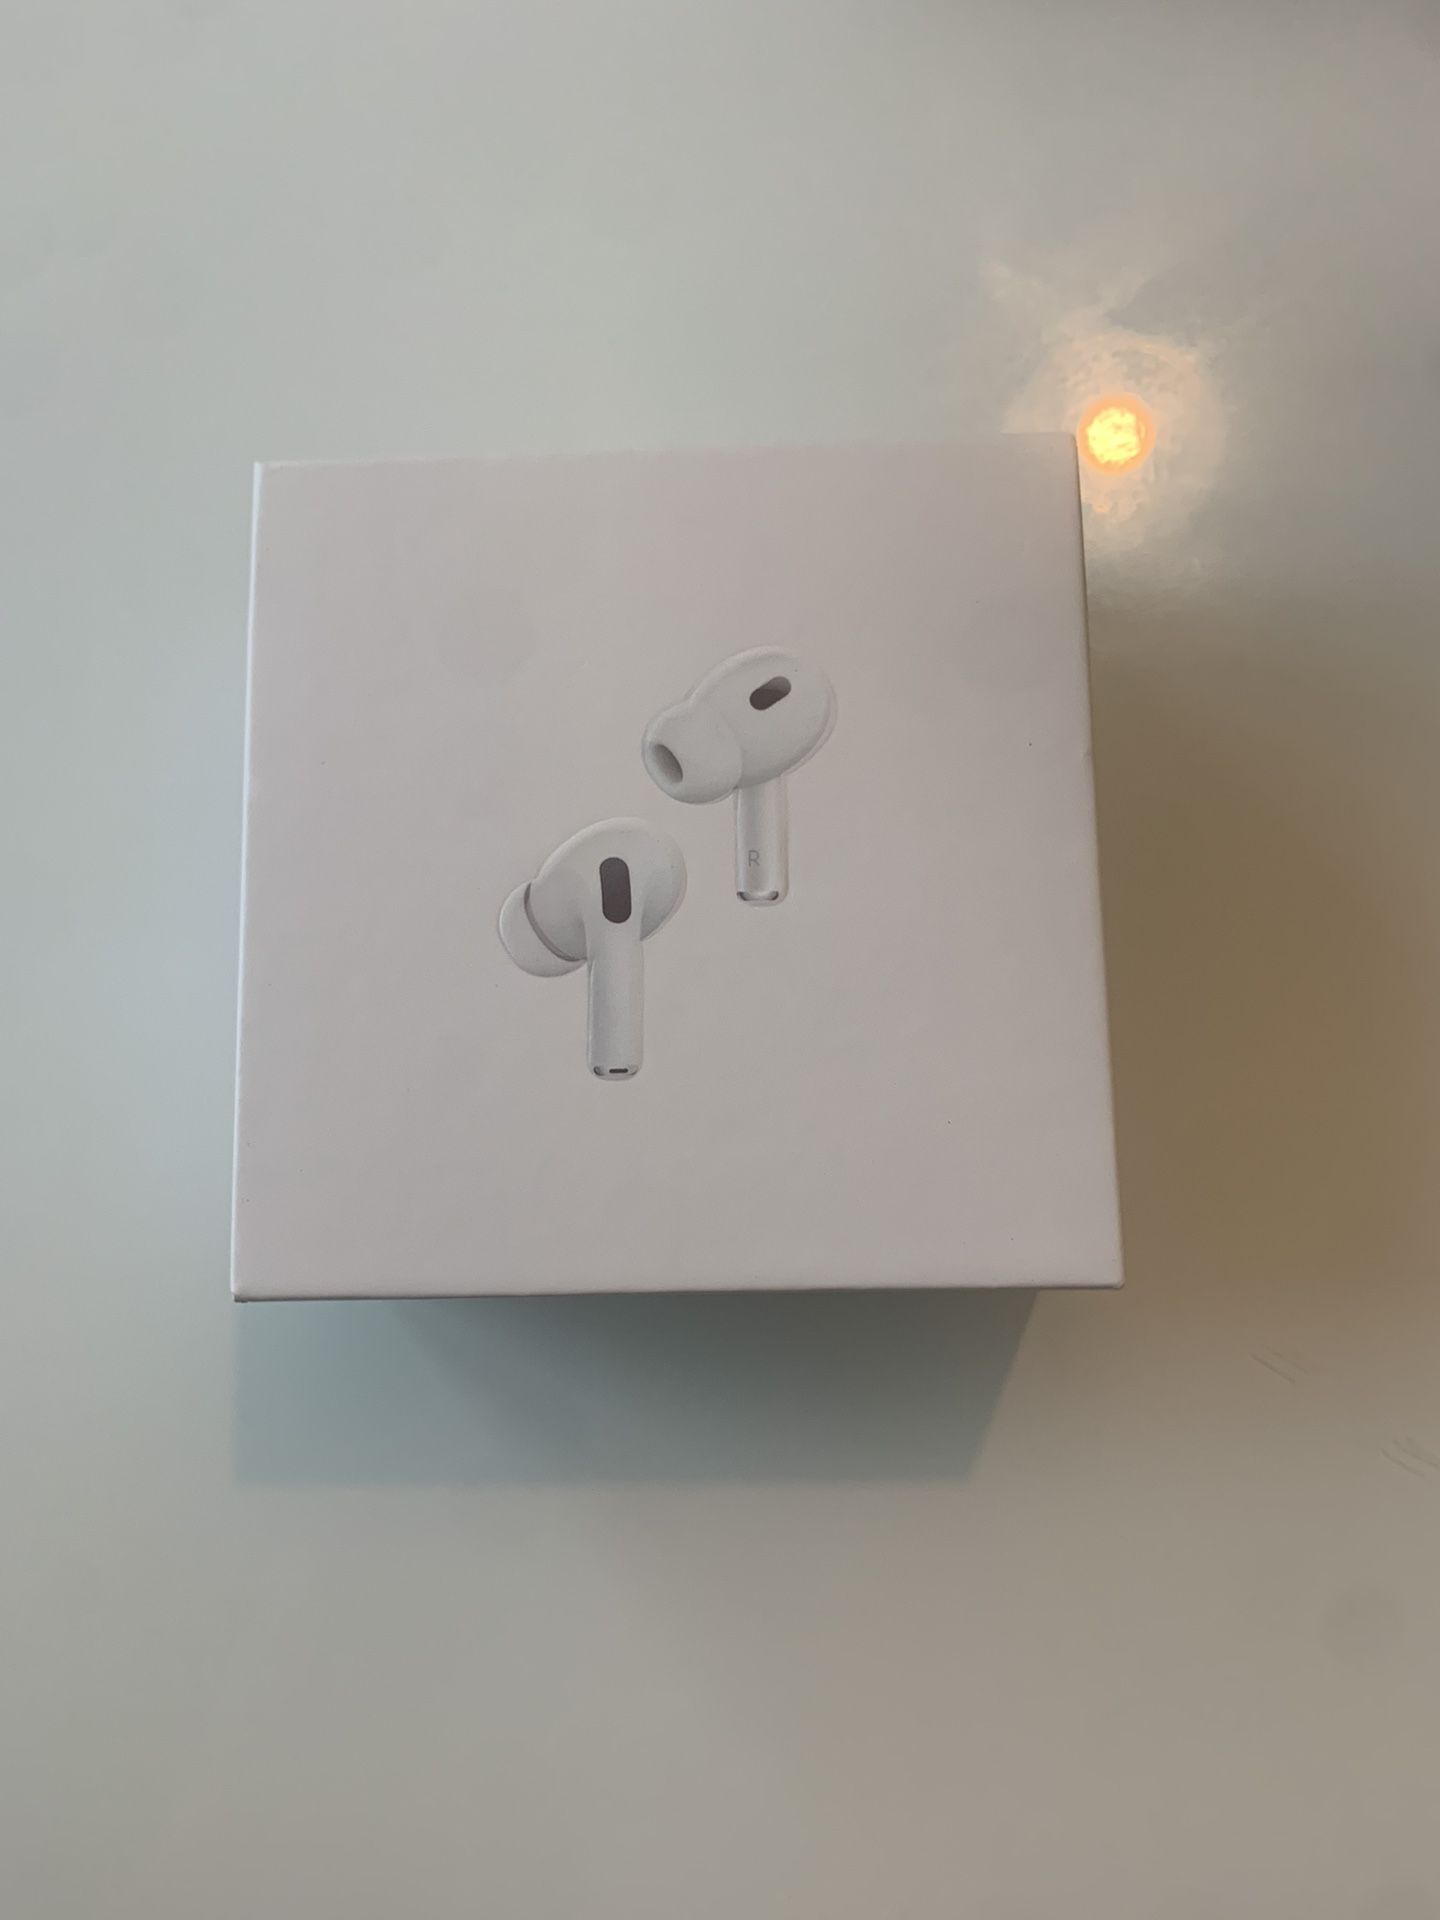 *BEST OFFER*Apple Airpods Pro 2nd Generation 